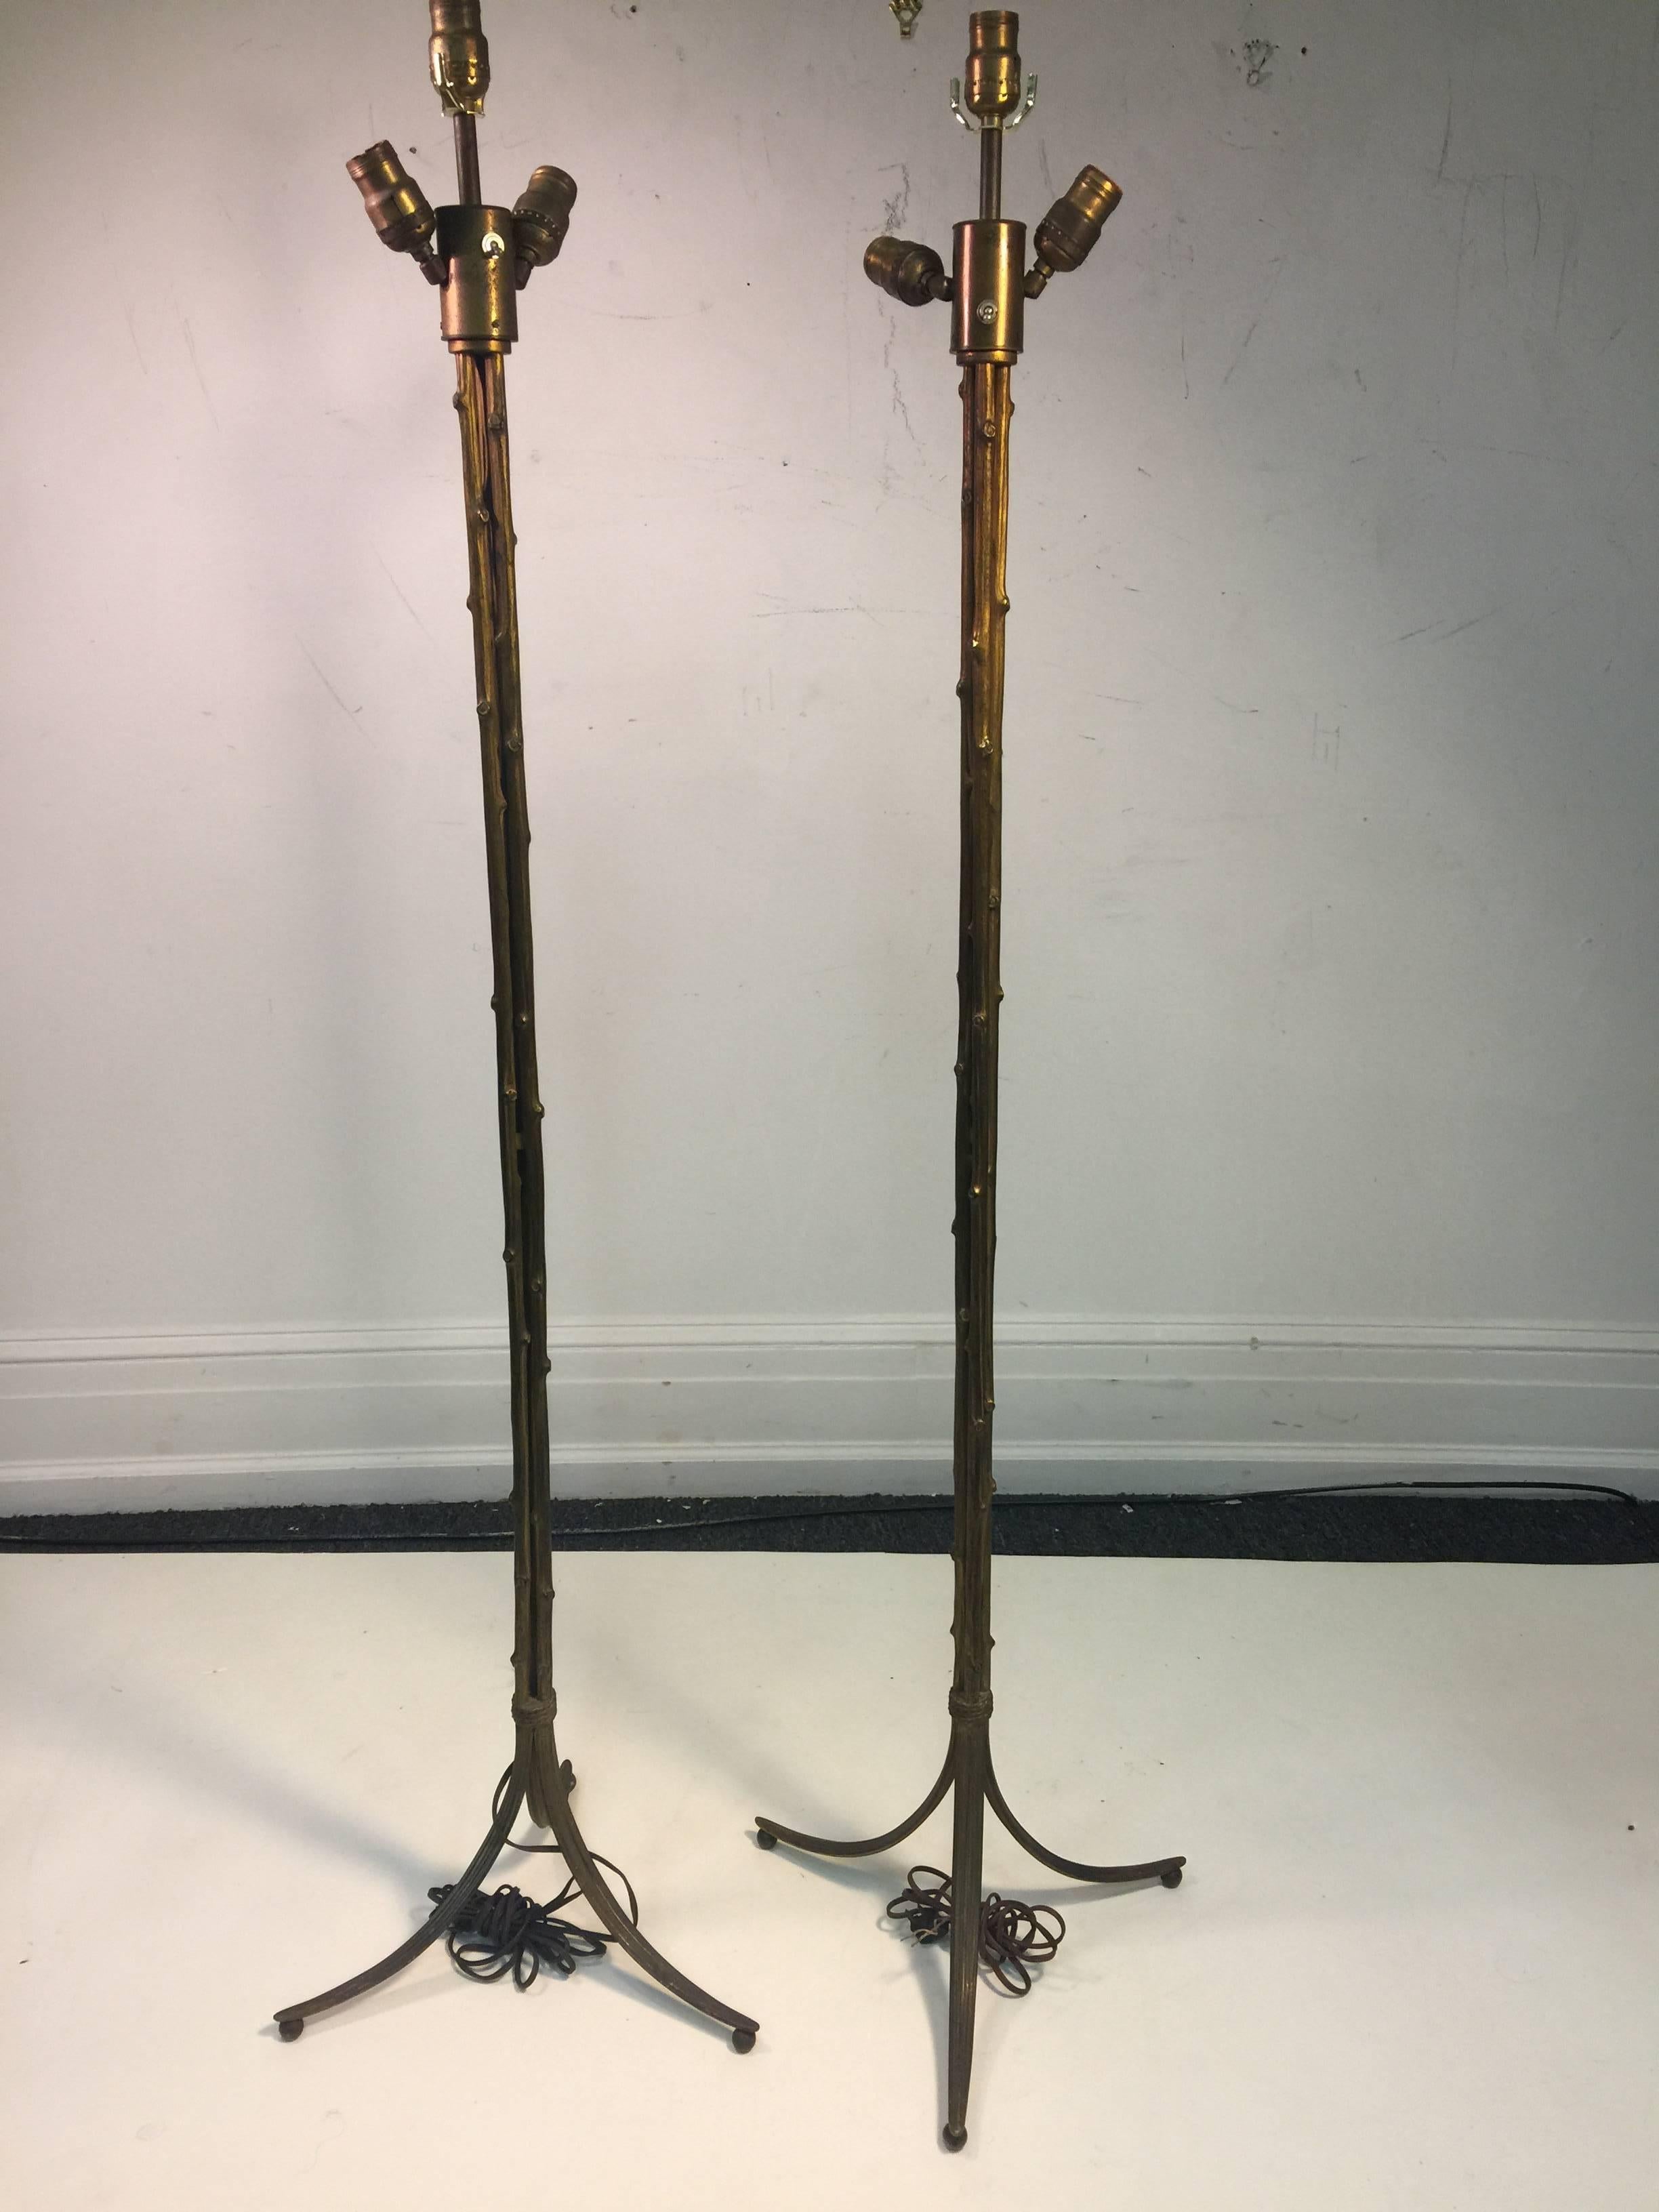 Pair of 1930s-1940s gilt bronze bamboo floor lamps with three sockets designed by French firm Maison Baguès. Beautifully cast and designed as a bundle of bamboo with a tripod base with a wrapped rope design at the base. The gilt finish is worn as in